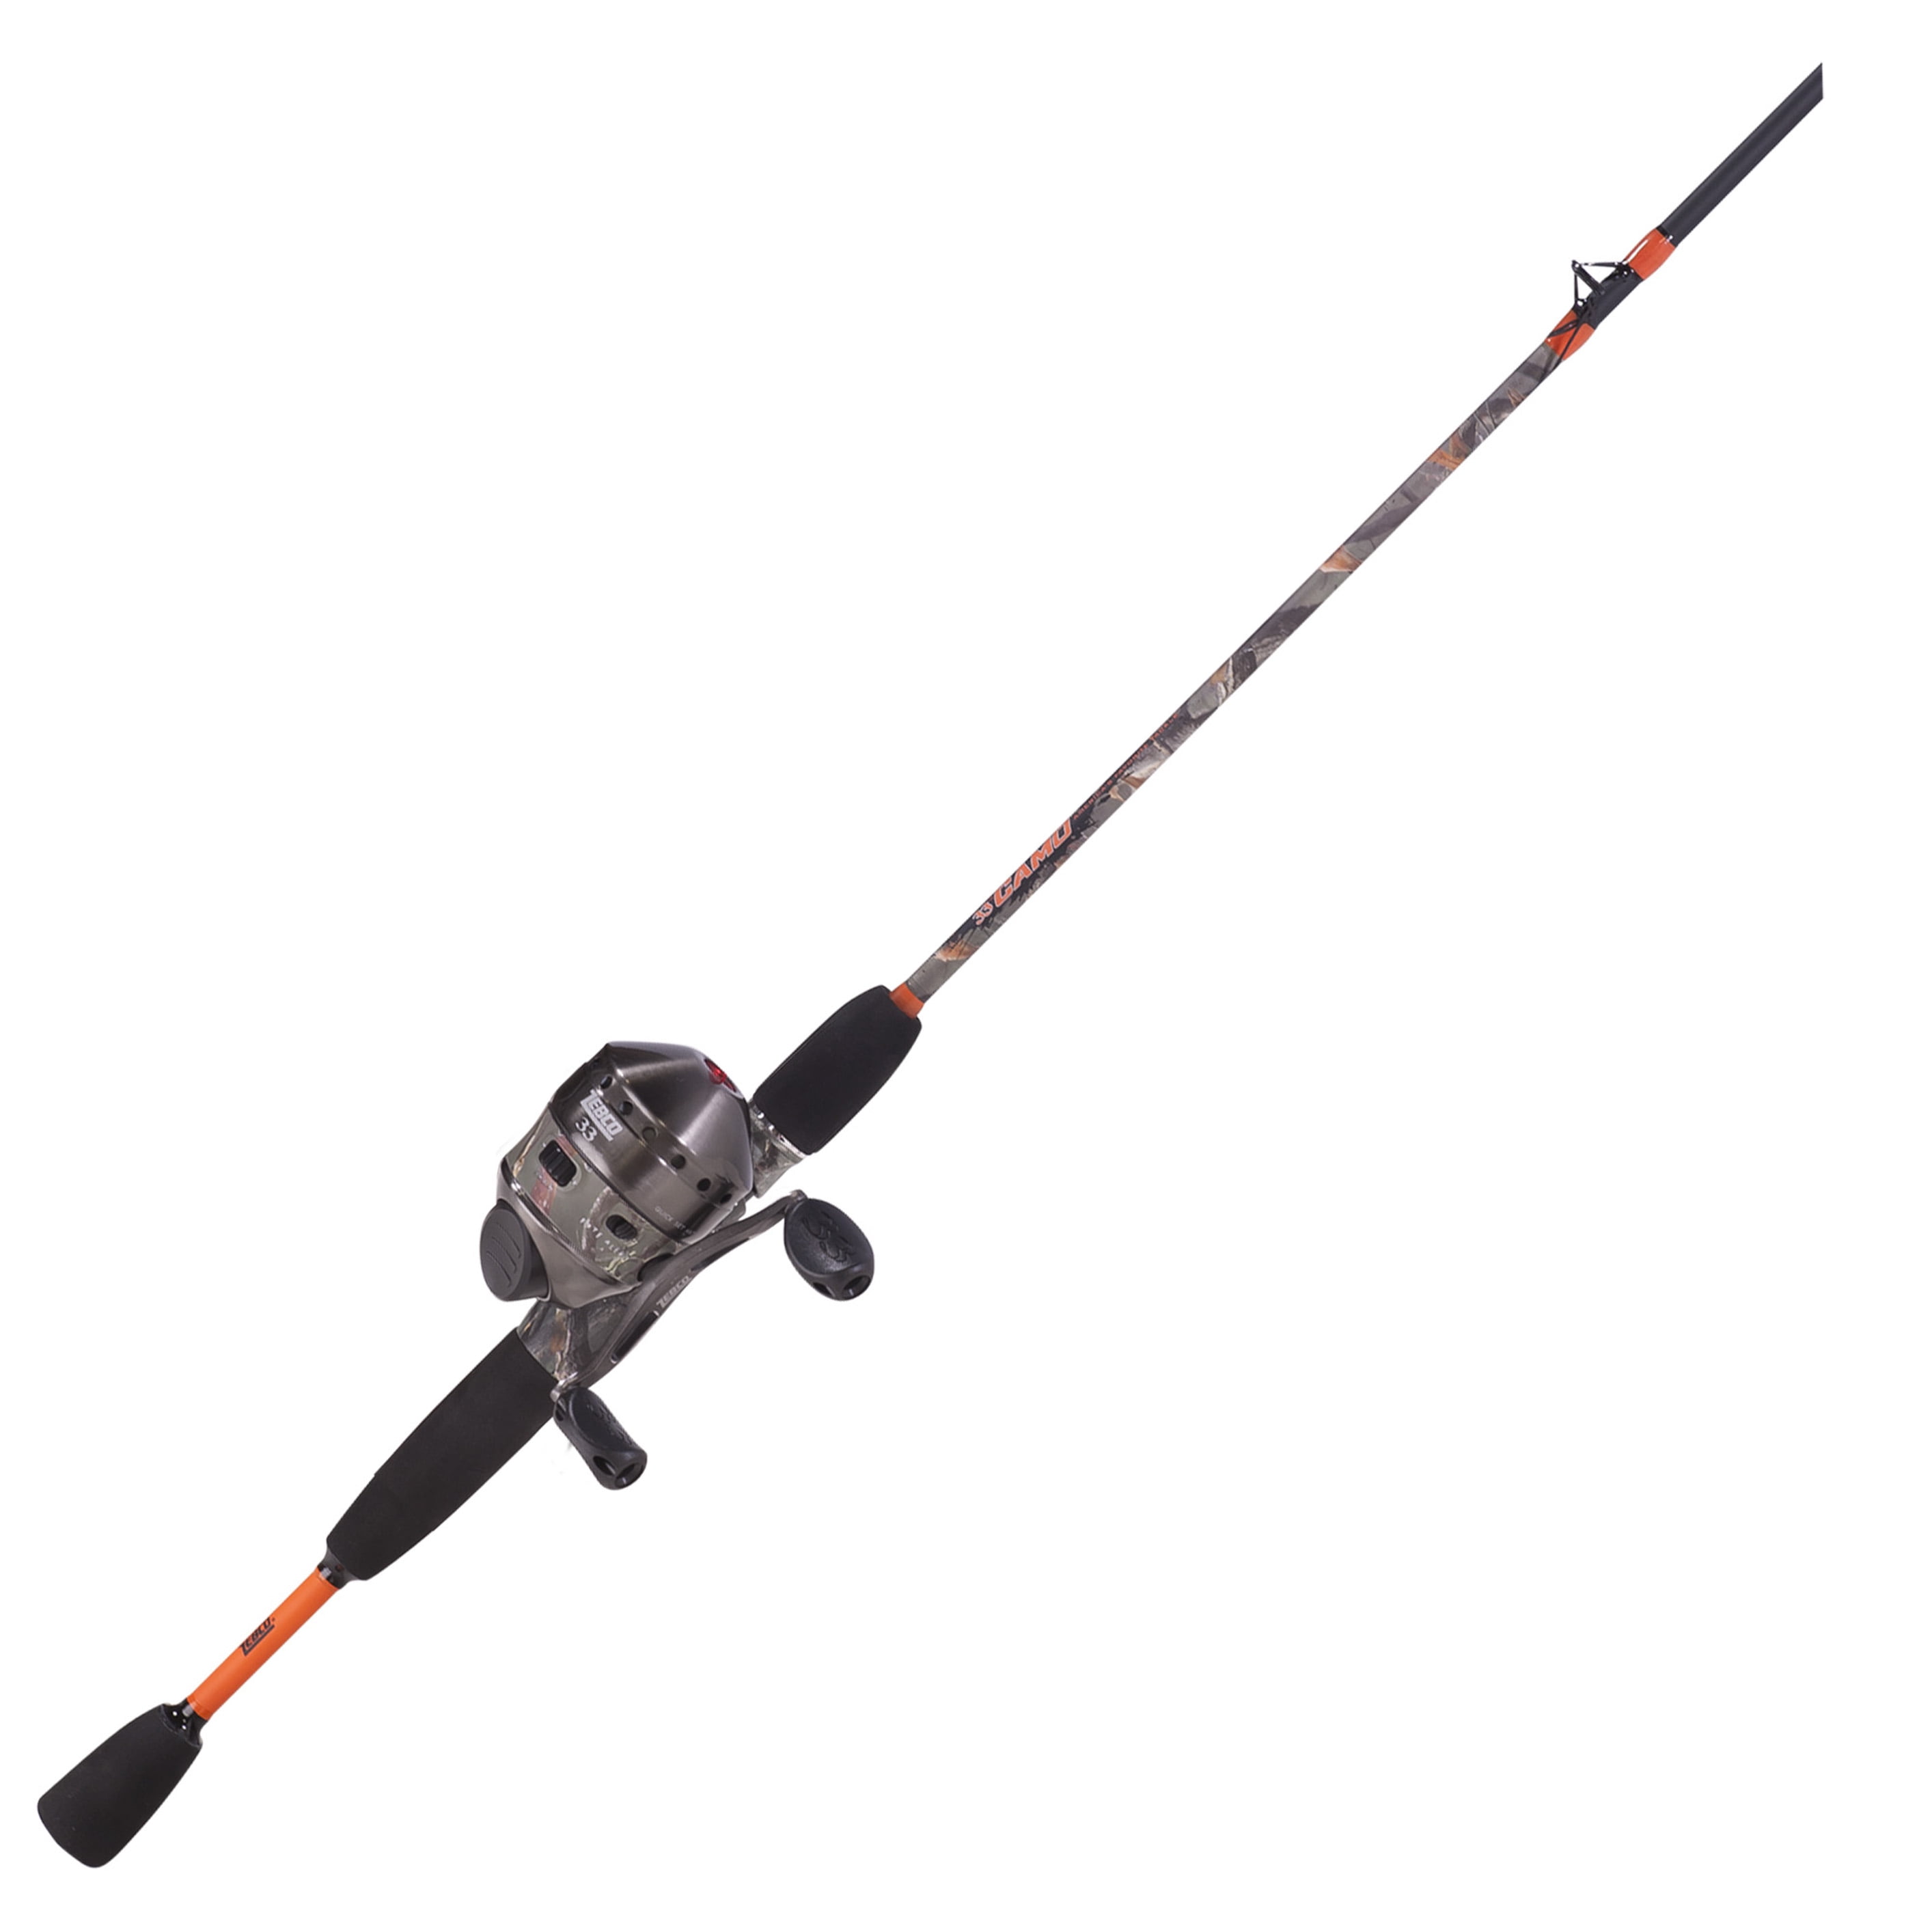  Zebco 33 Camo Spincast Reel and Fishing Rod Combo, 6